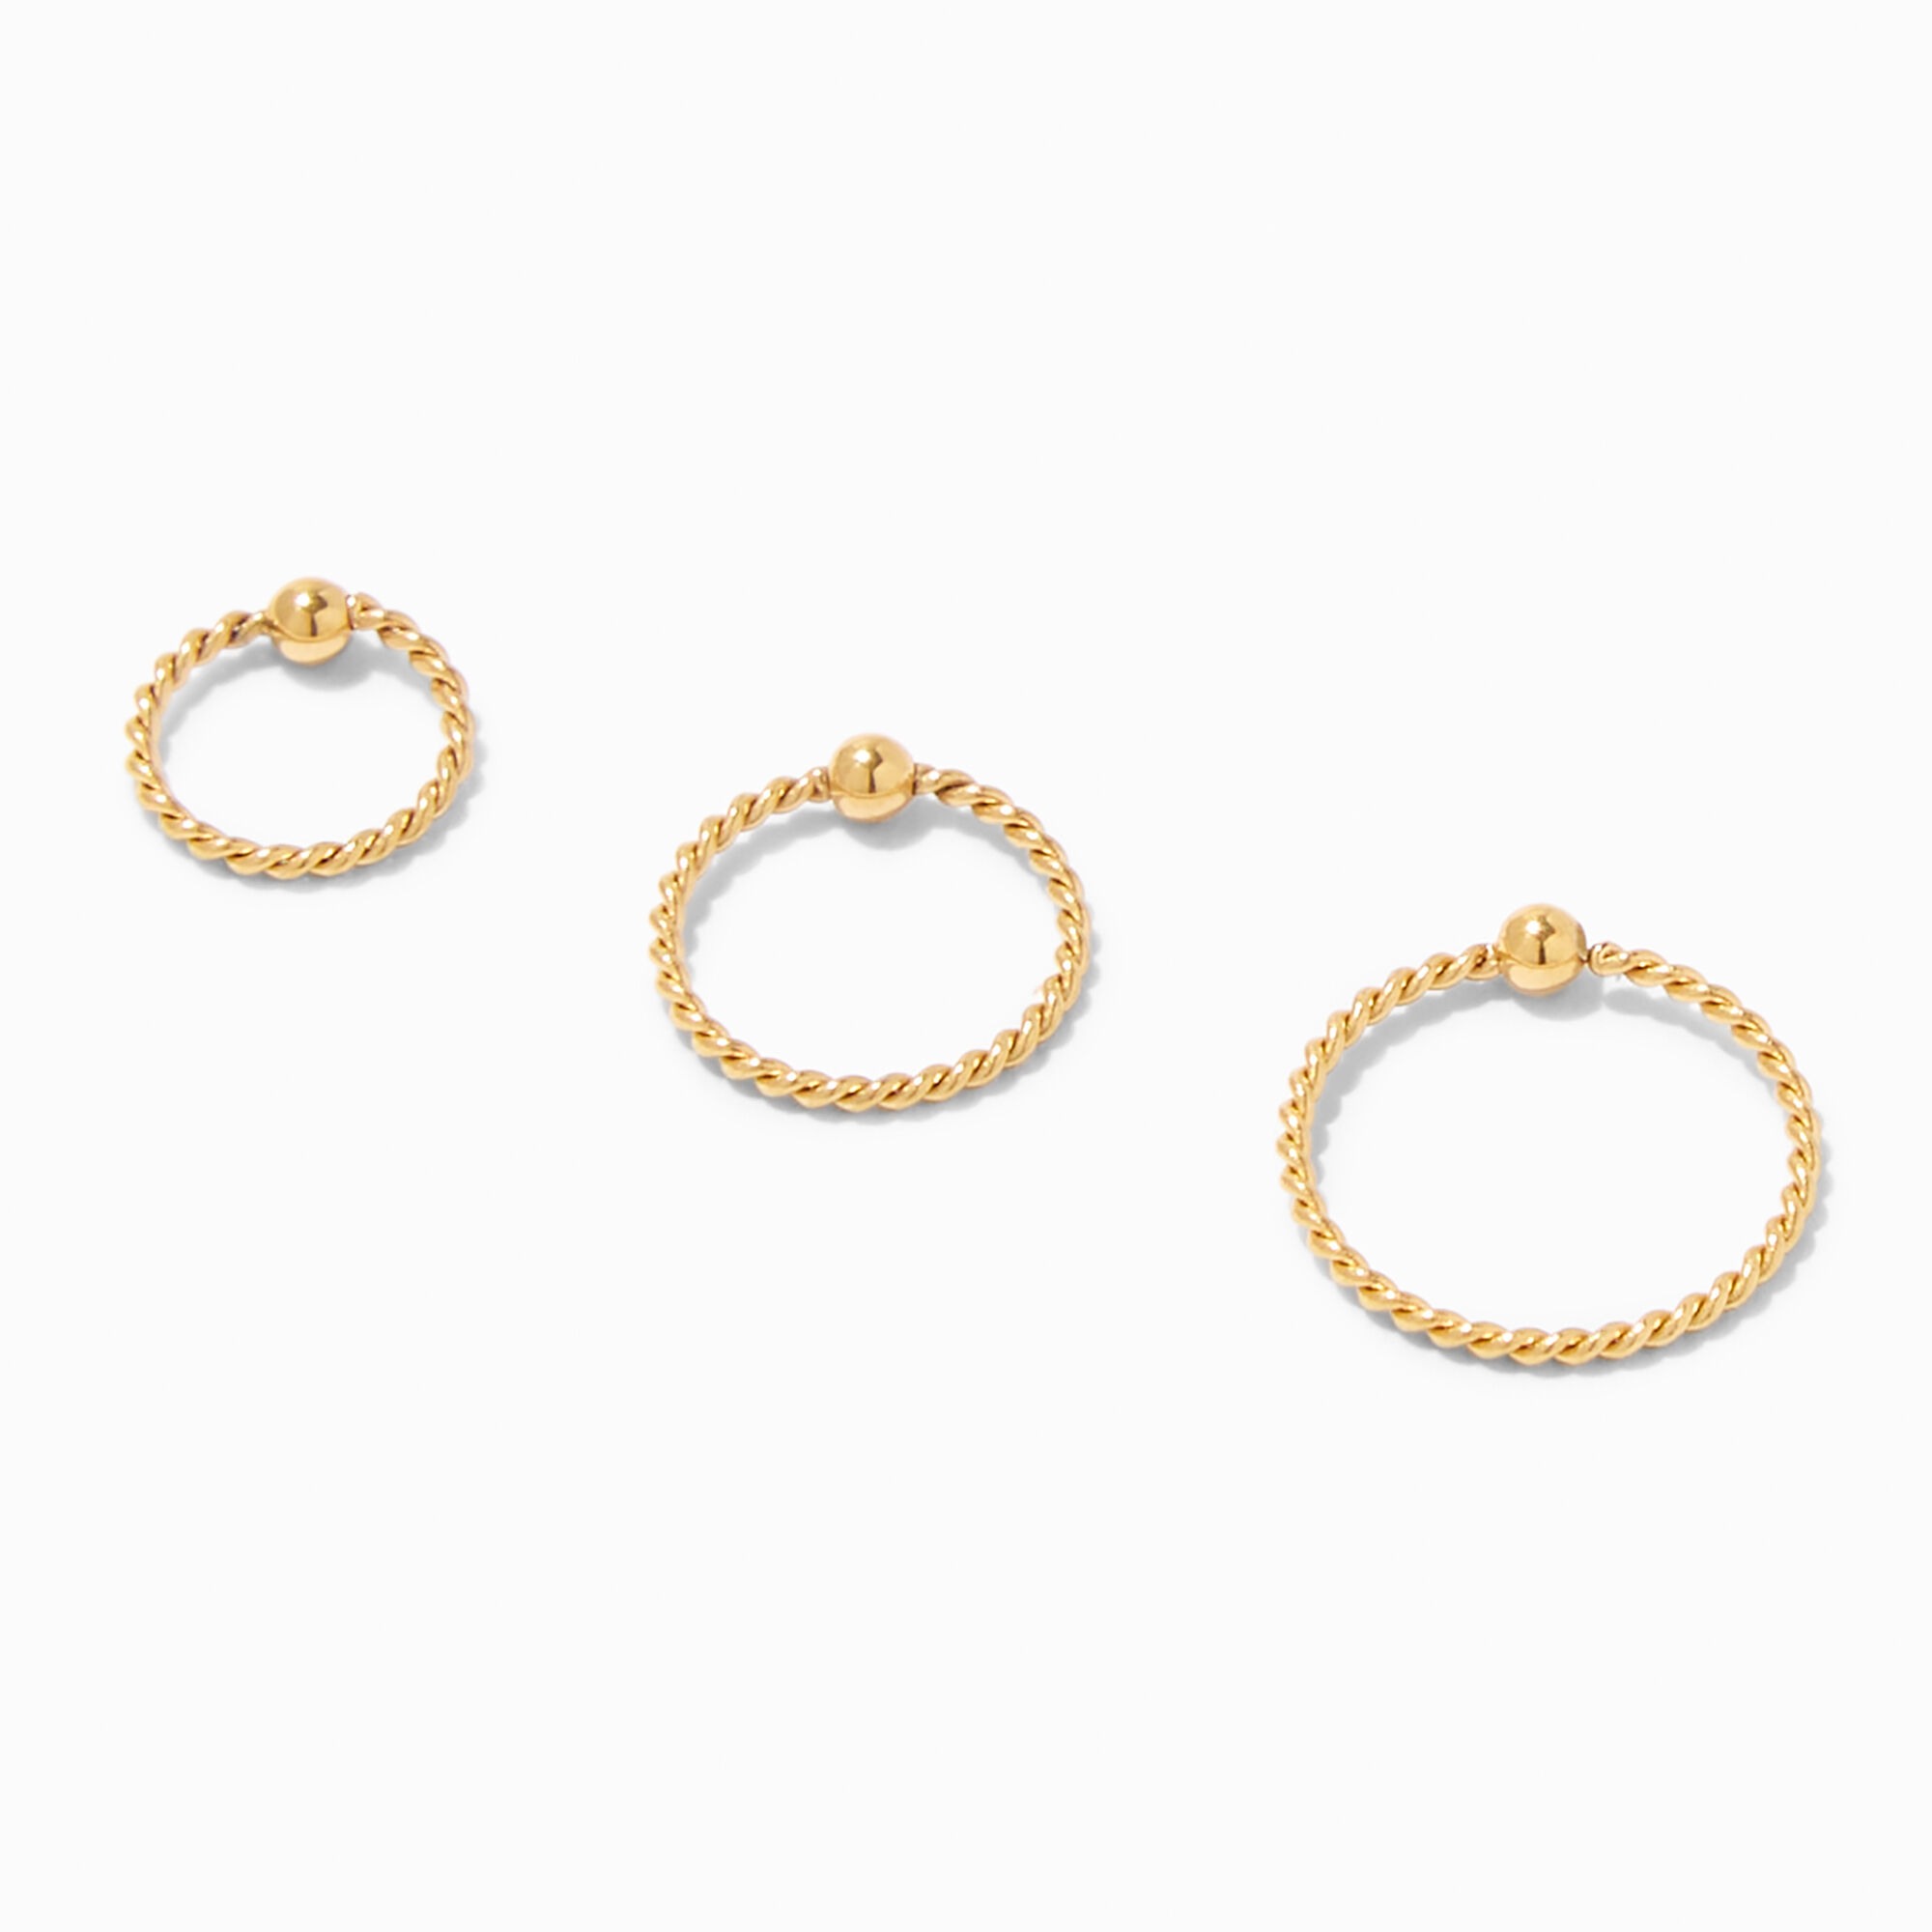 View Claires Ball Twisted 20G Nose Rings 3 Pack Gold information